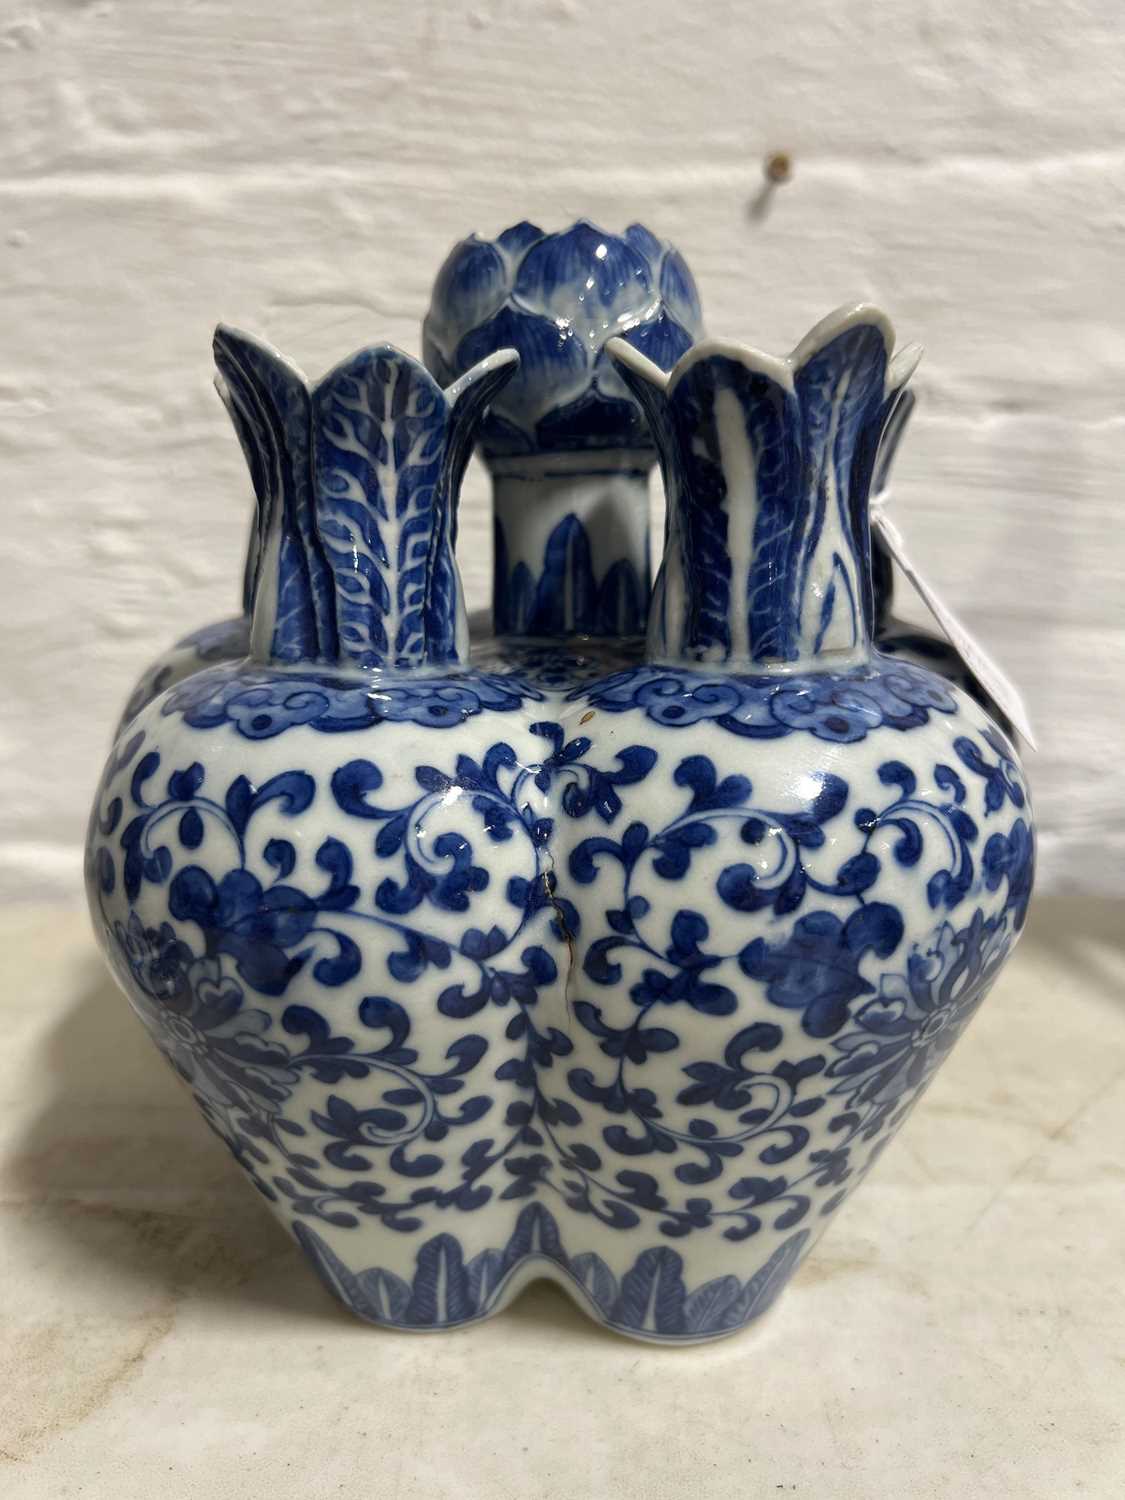 Chinese porcelain blue and white tulip or bulb vase, 19th century - Image 3 of 9